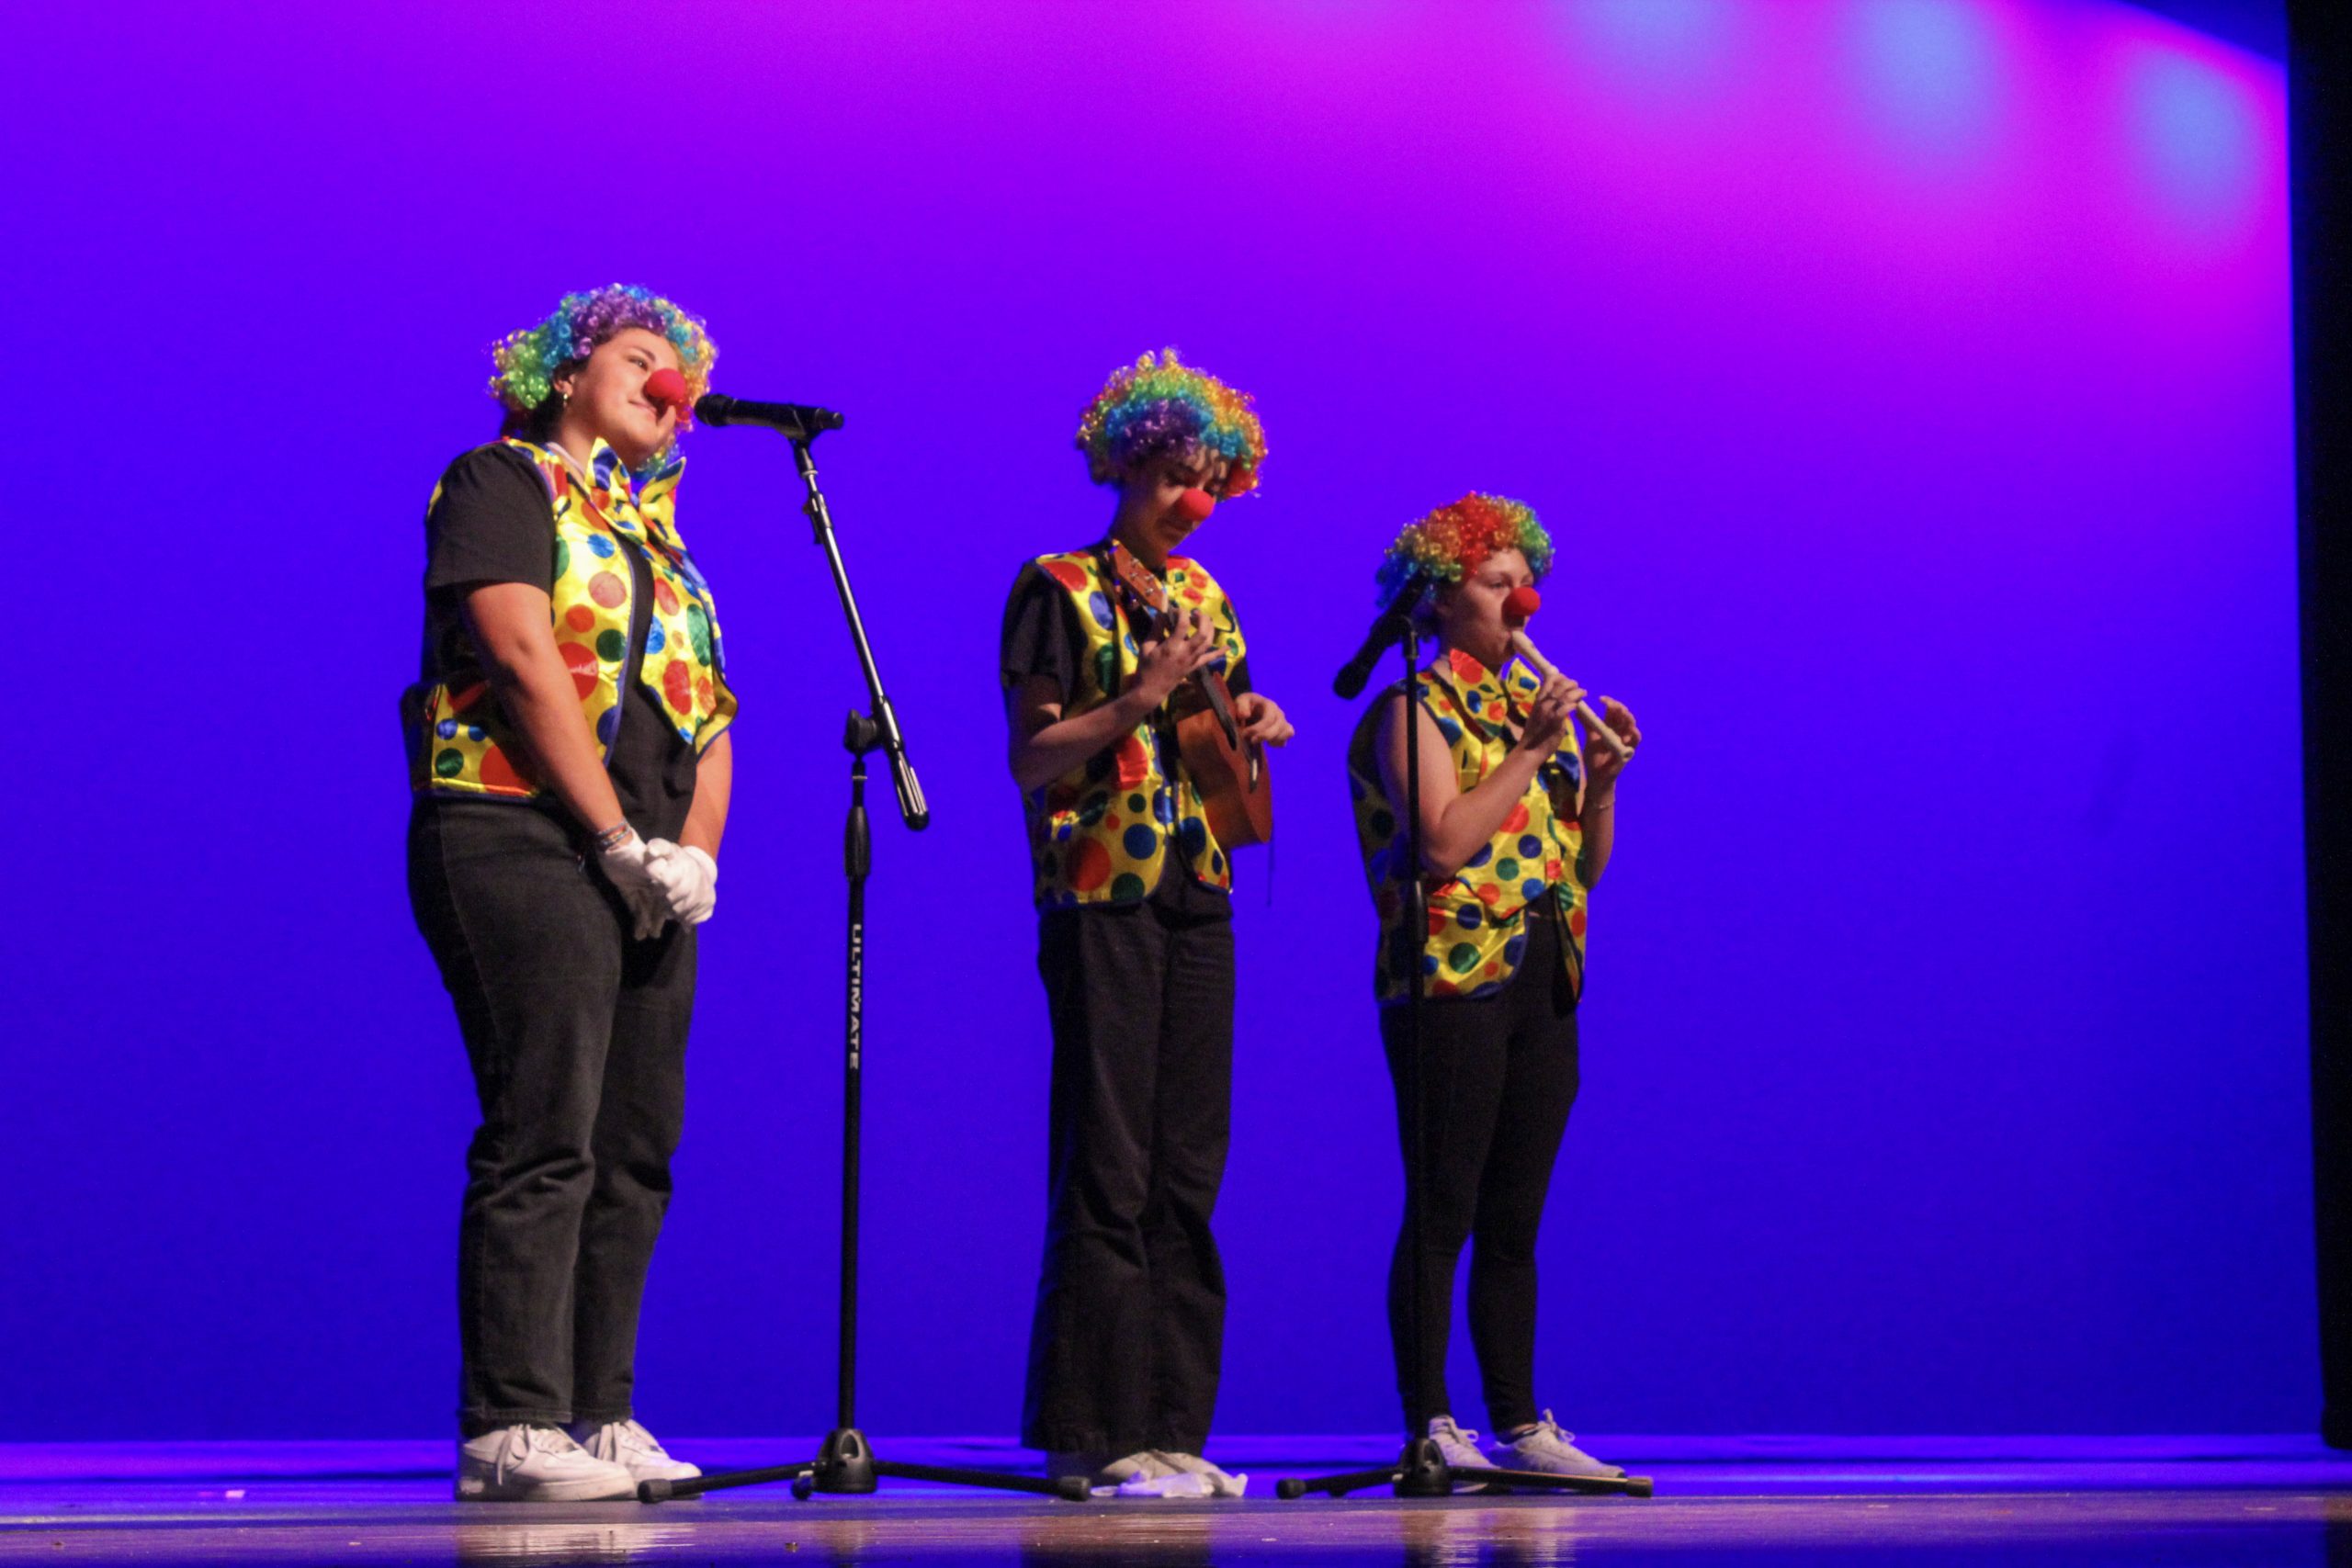 Sophomore MariaJose DeLaTorre, sophomore Emma Kolah and senior Ellory Dickerson performed as clowns as a part of The Go Team Circus. They did comedic performances of Twinkle Twinkle Little Star, Hot Cross Buns and Riptide by Vance Joy.